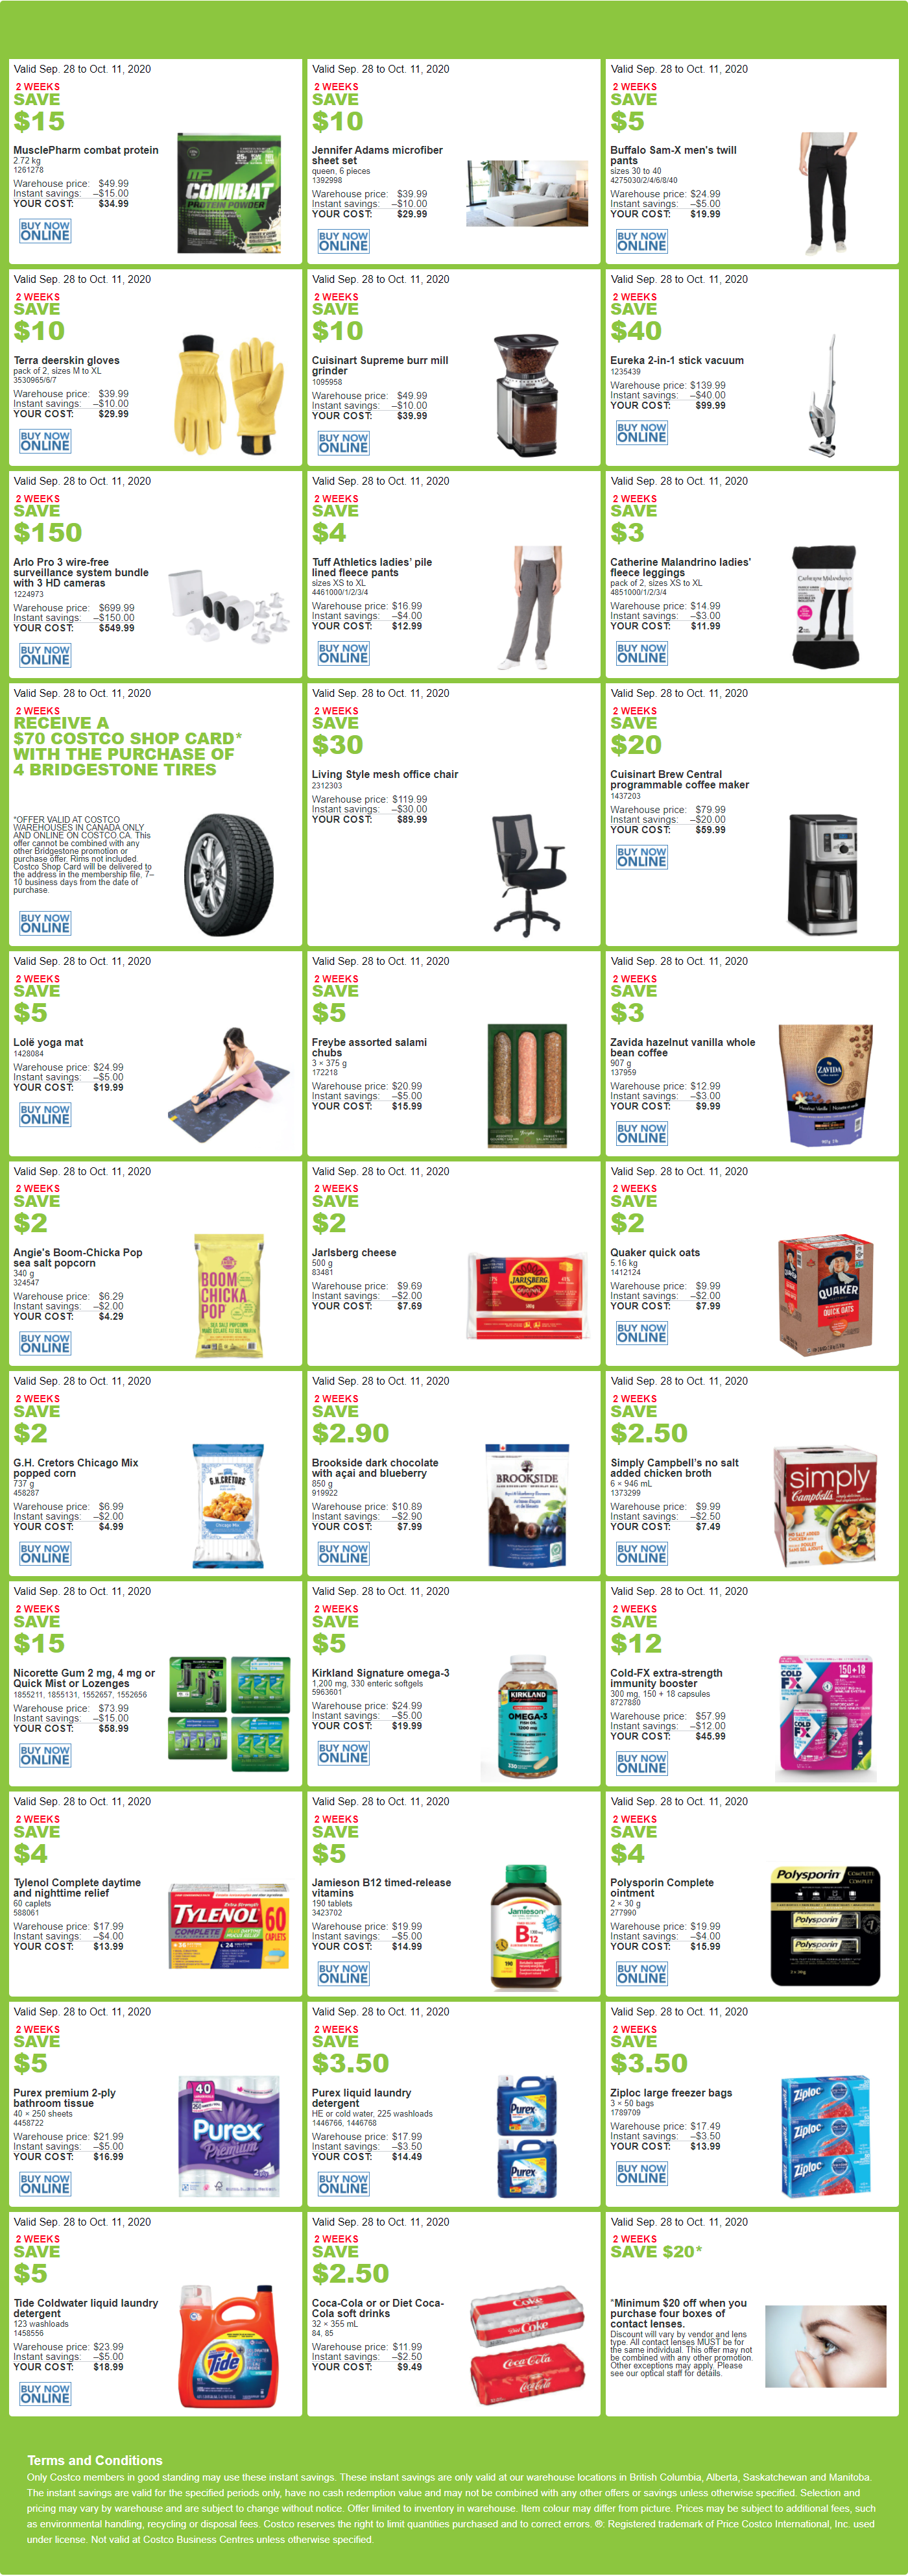 Costco Flyer & Costco Sale Items for Sep 28 - Oct 4, 2020, for BC, AB, SK,  MB - Costco West Fan Blog